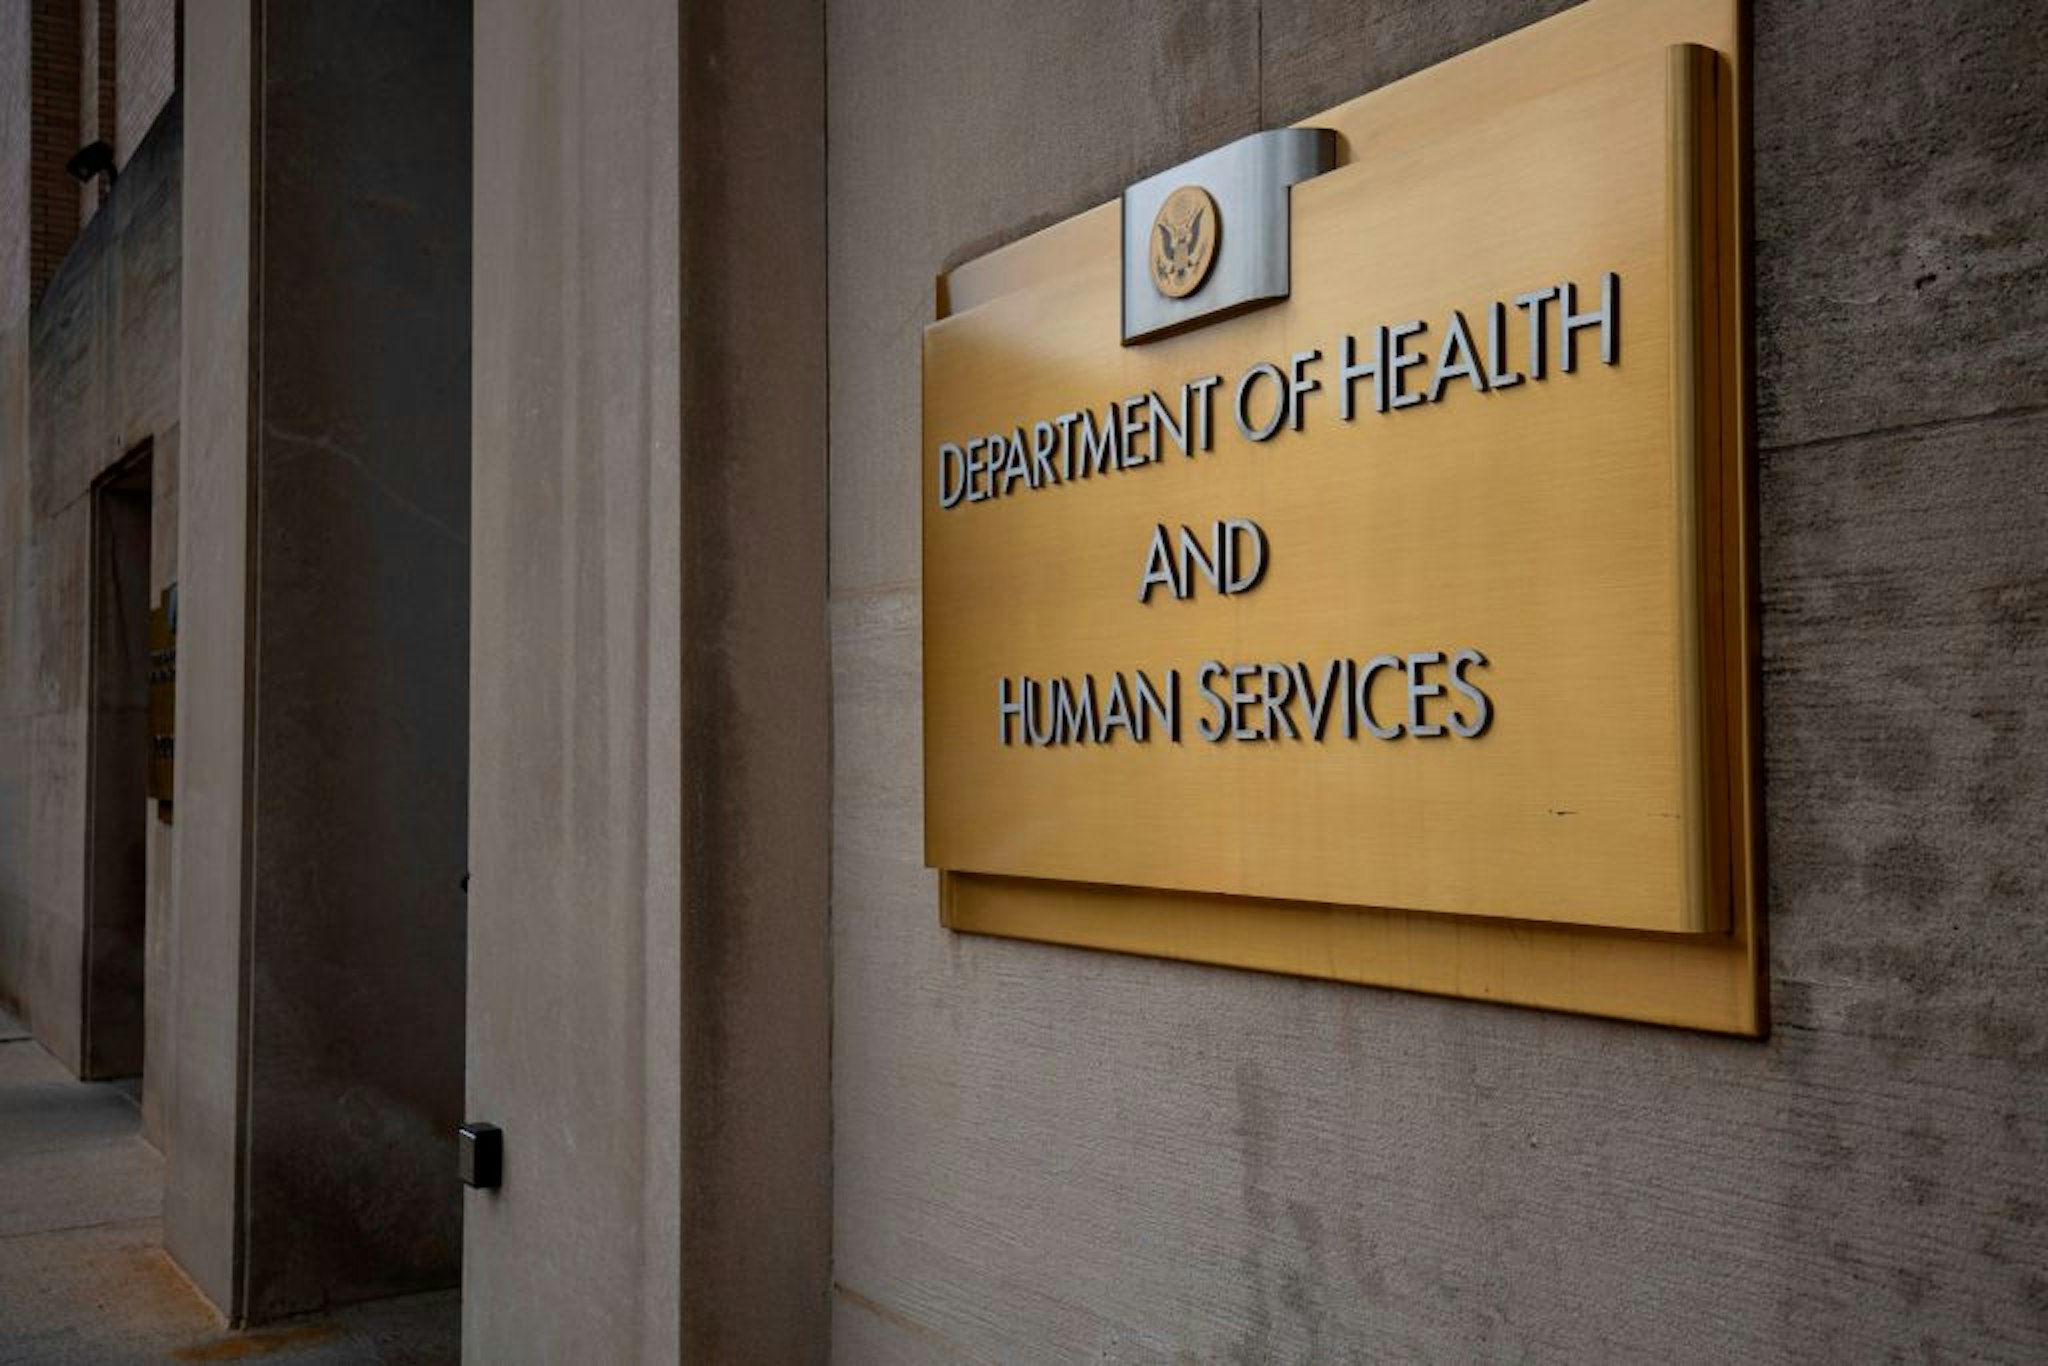 The US Department of Health and Human Services building is seen in Washington, DC, on July 22, 2019. (Photo by Alastair Pike / AFP)